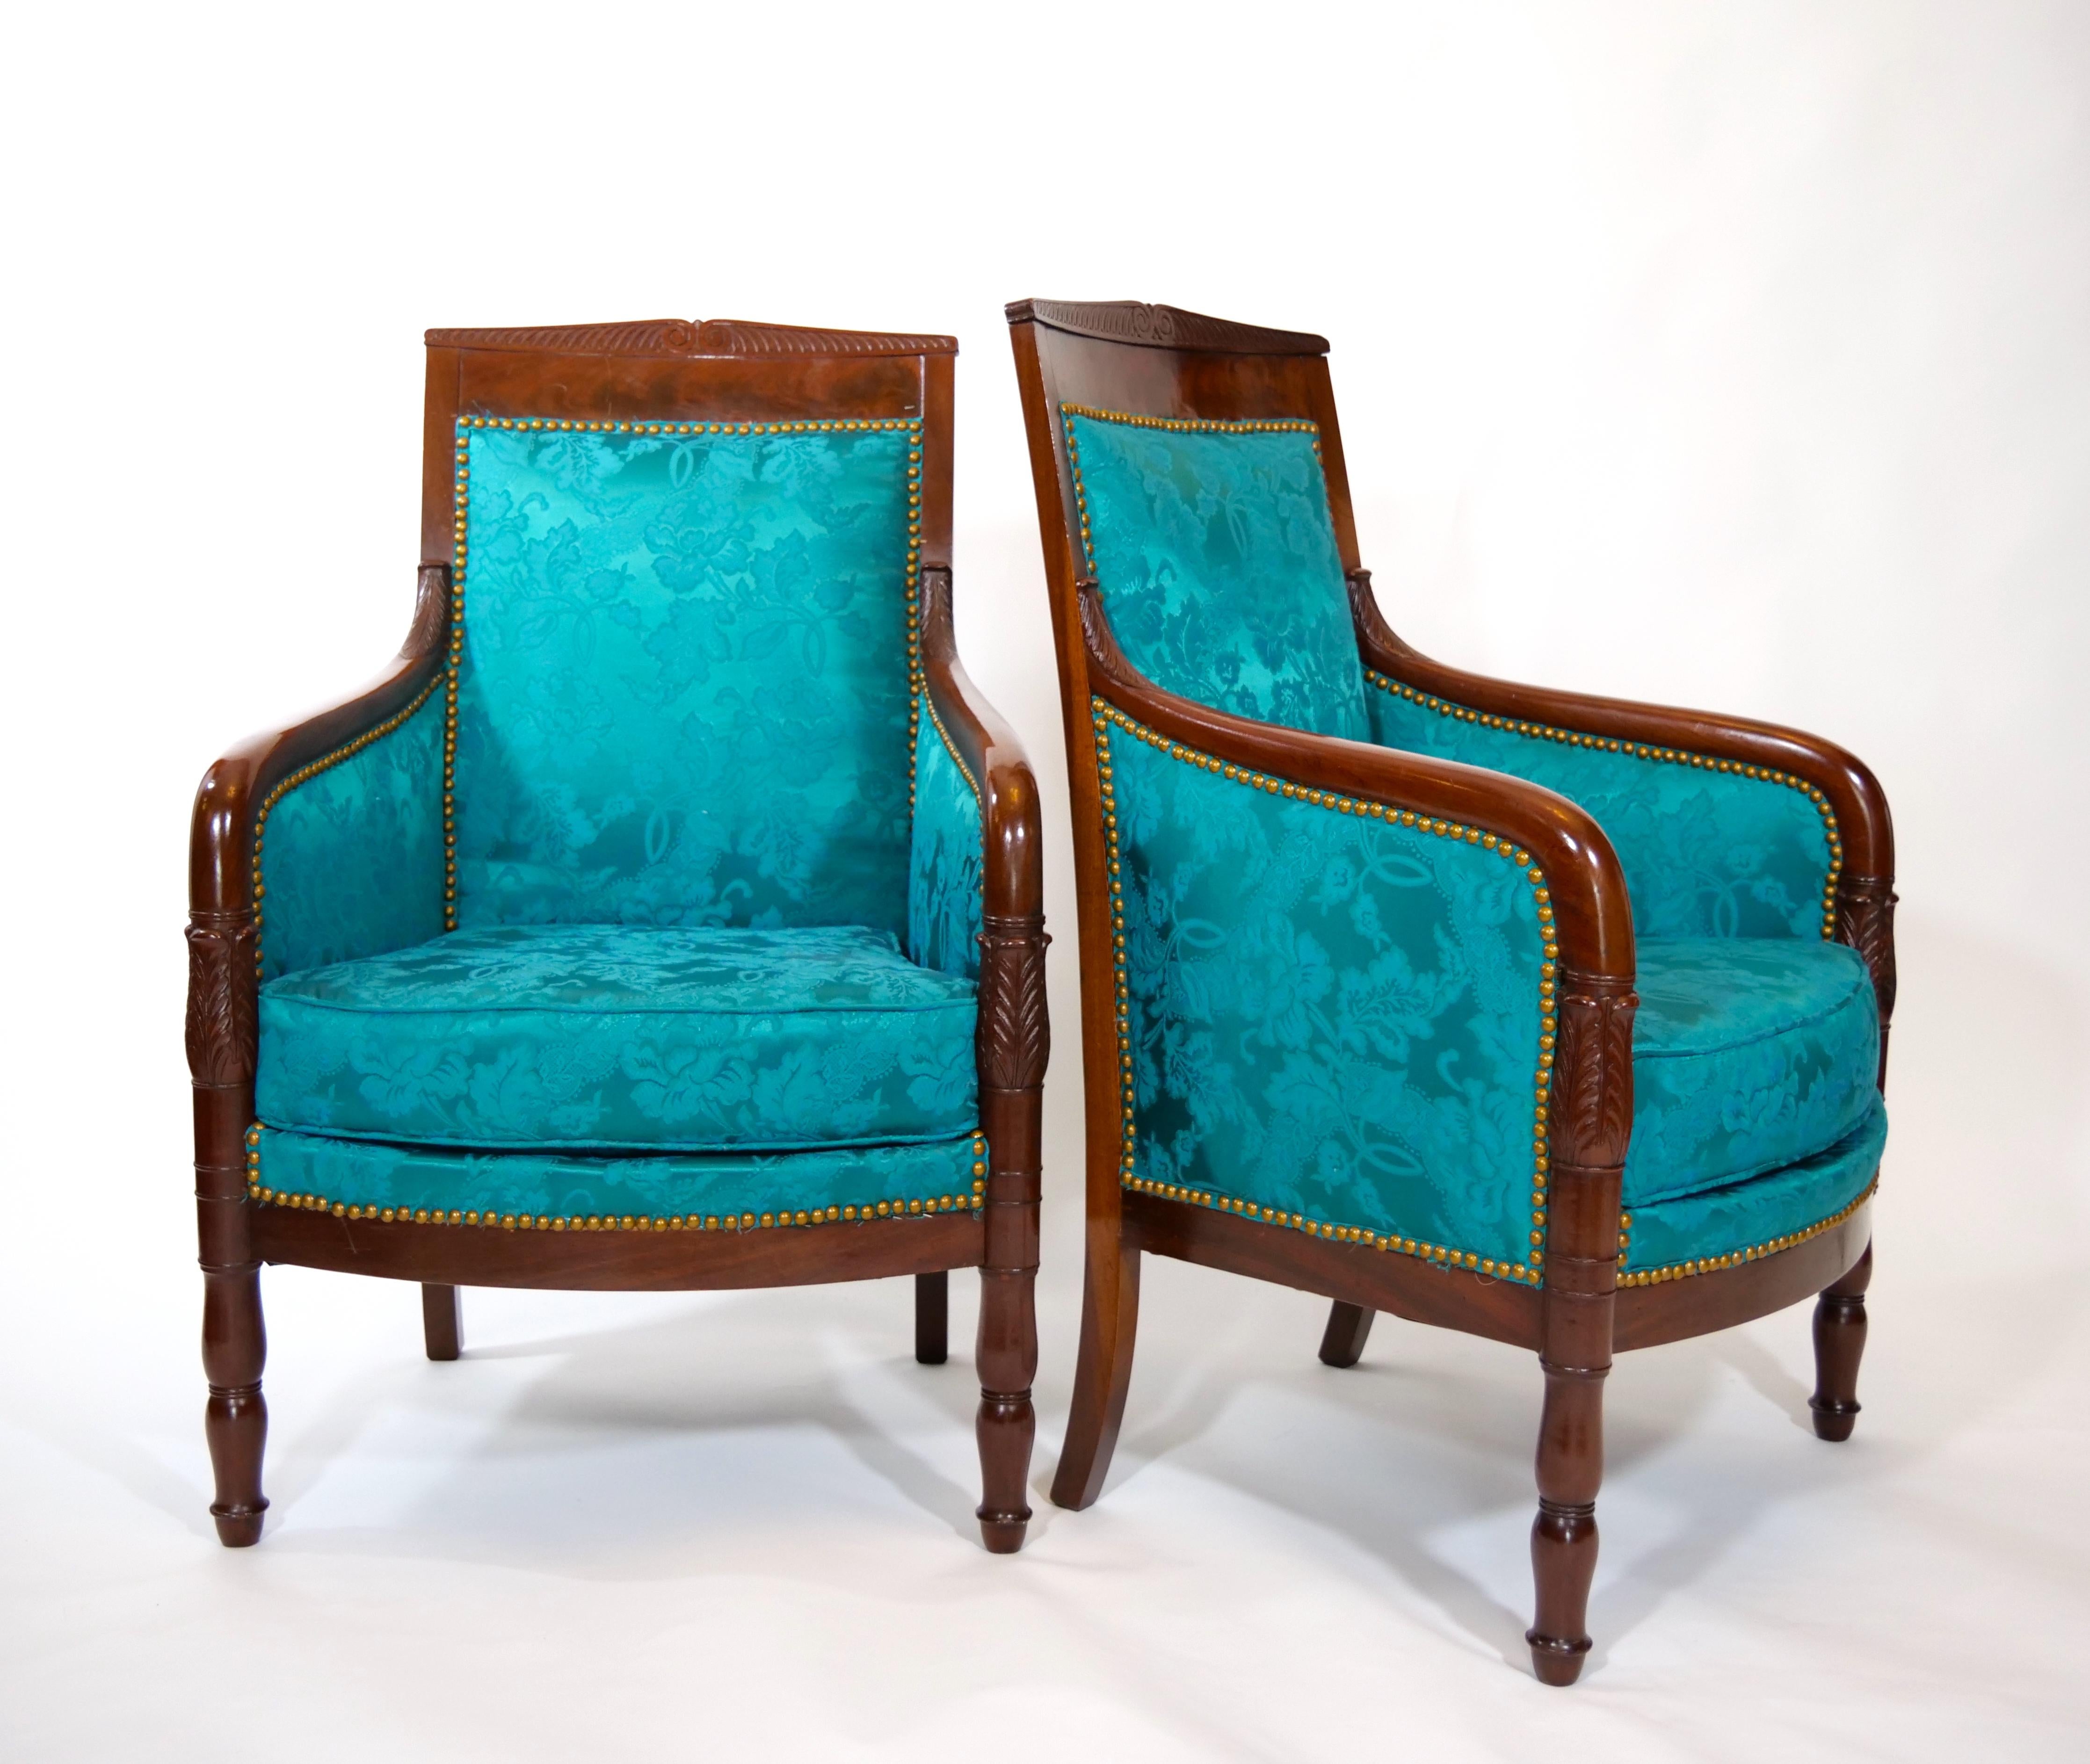 19th century Edwardian style mahogany wood framed upholstered pair armchair. Each chair is in great antique condition. Signed and dated underneath by the maker. Immaculate upholstery. Minor wear consistent with age / use. Each armchair measure about